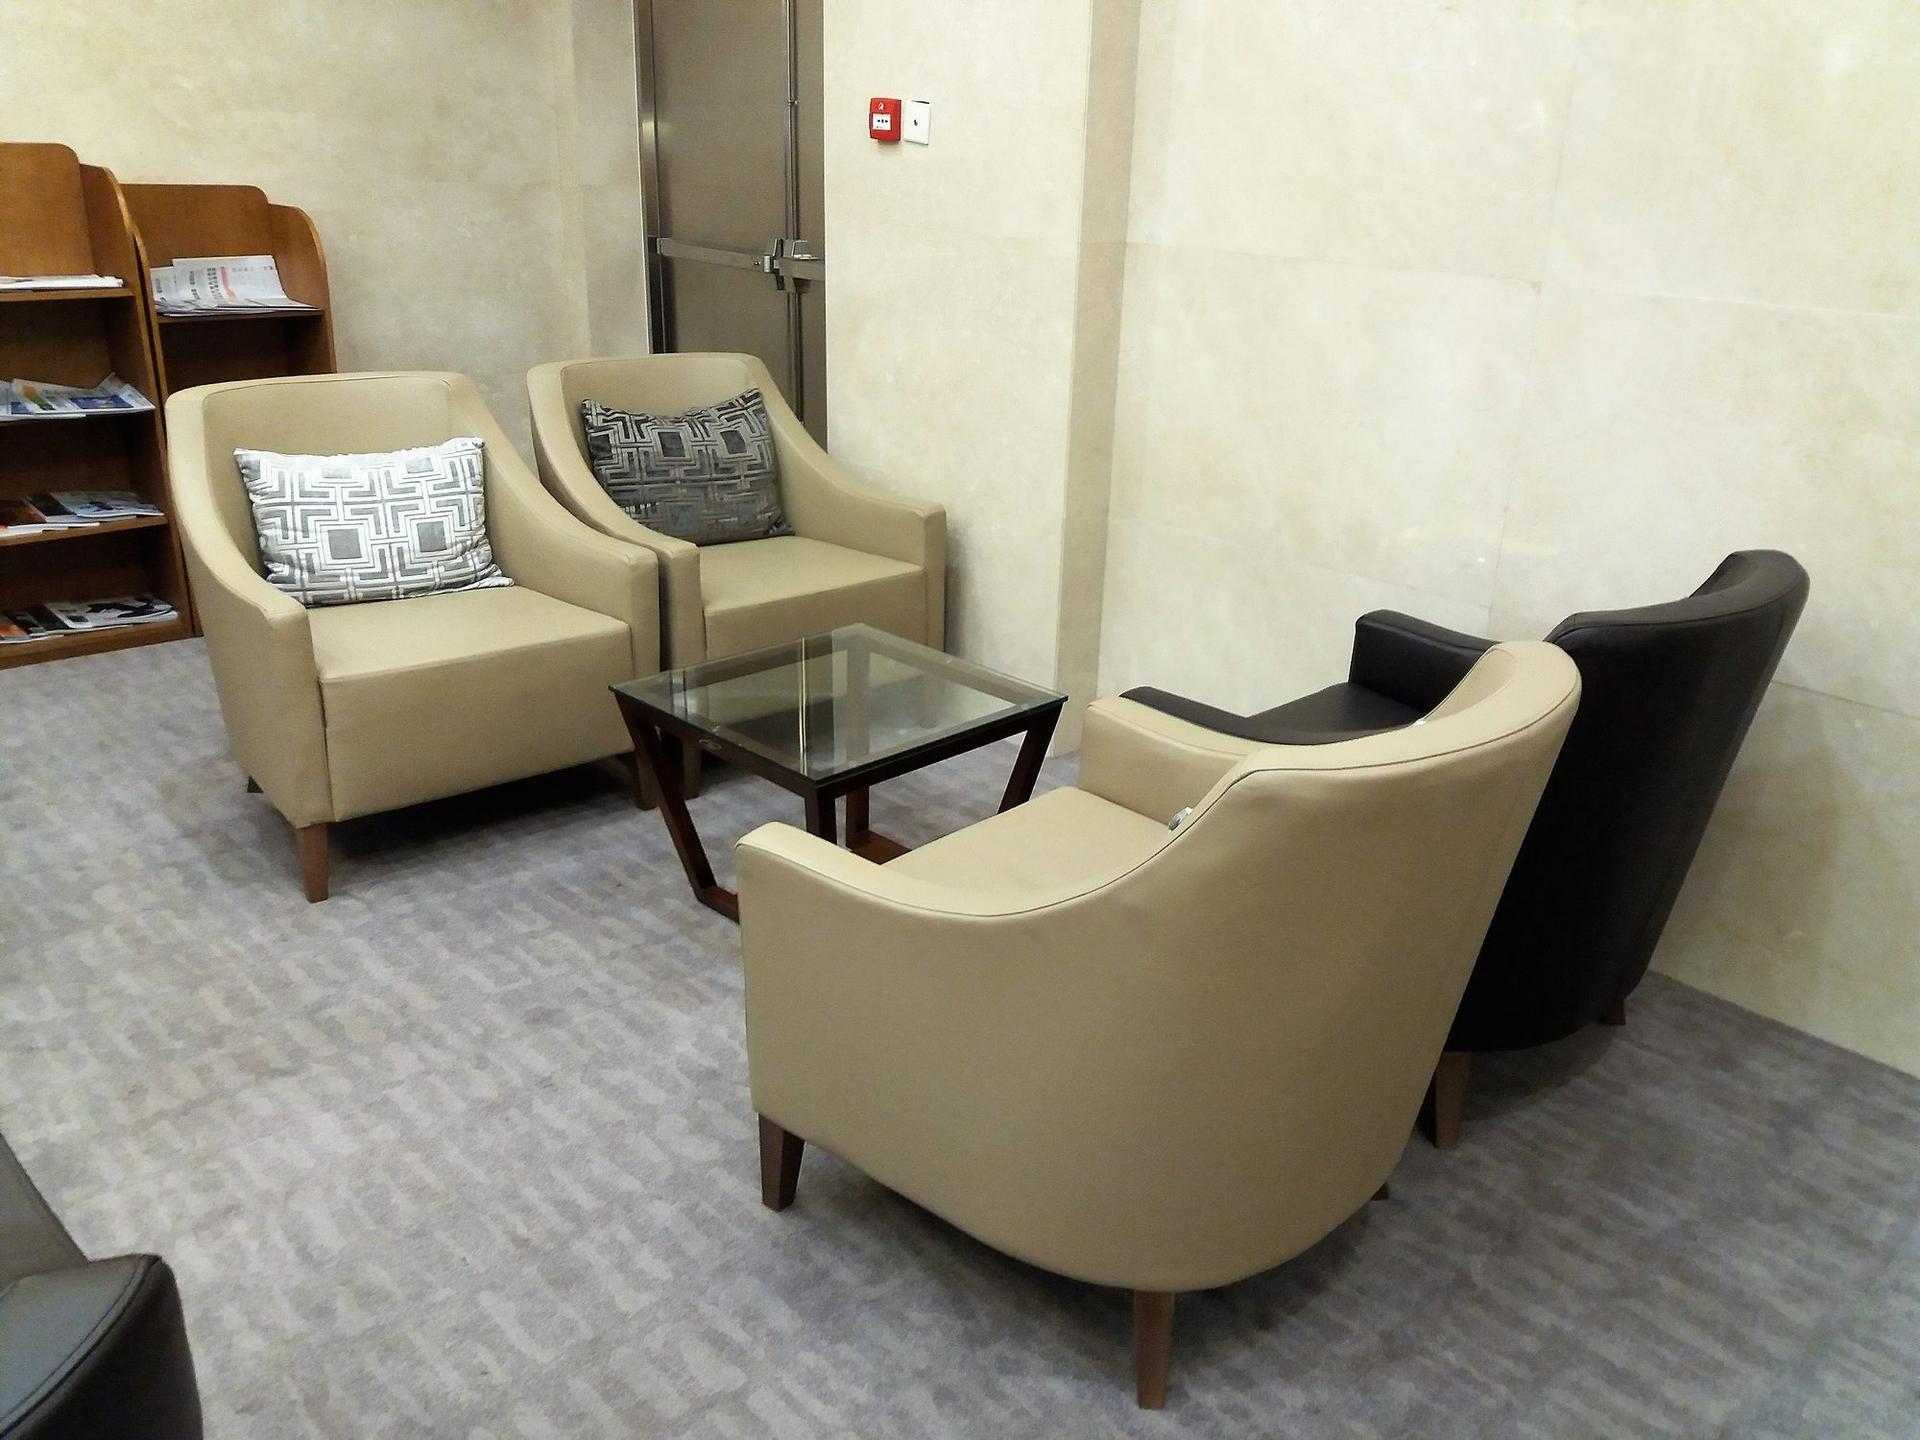 Air China First & Business Class Lounge image 2 of 12